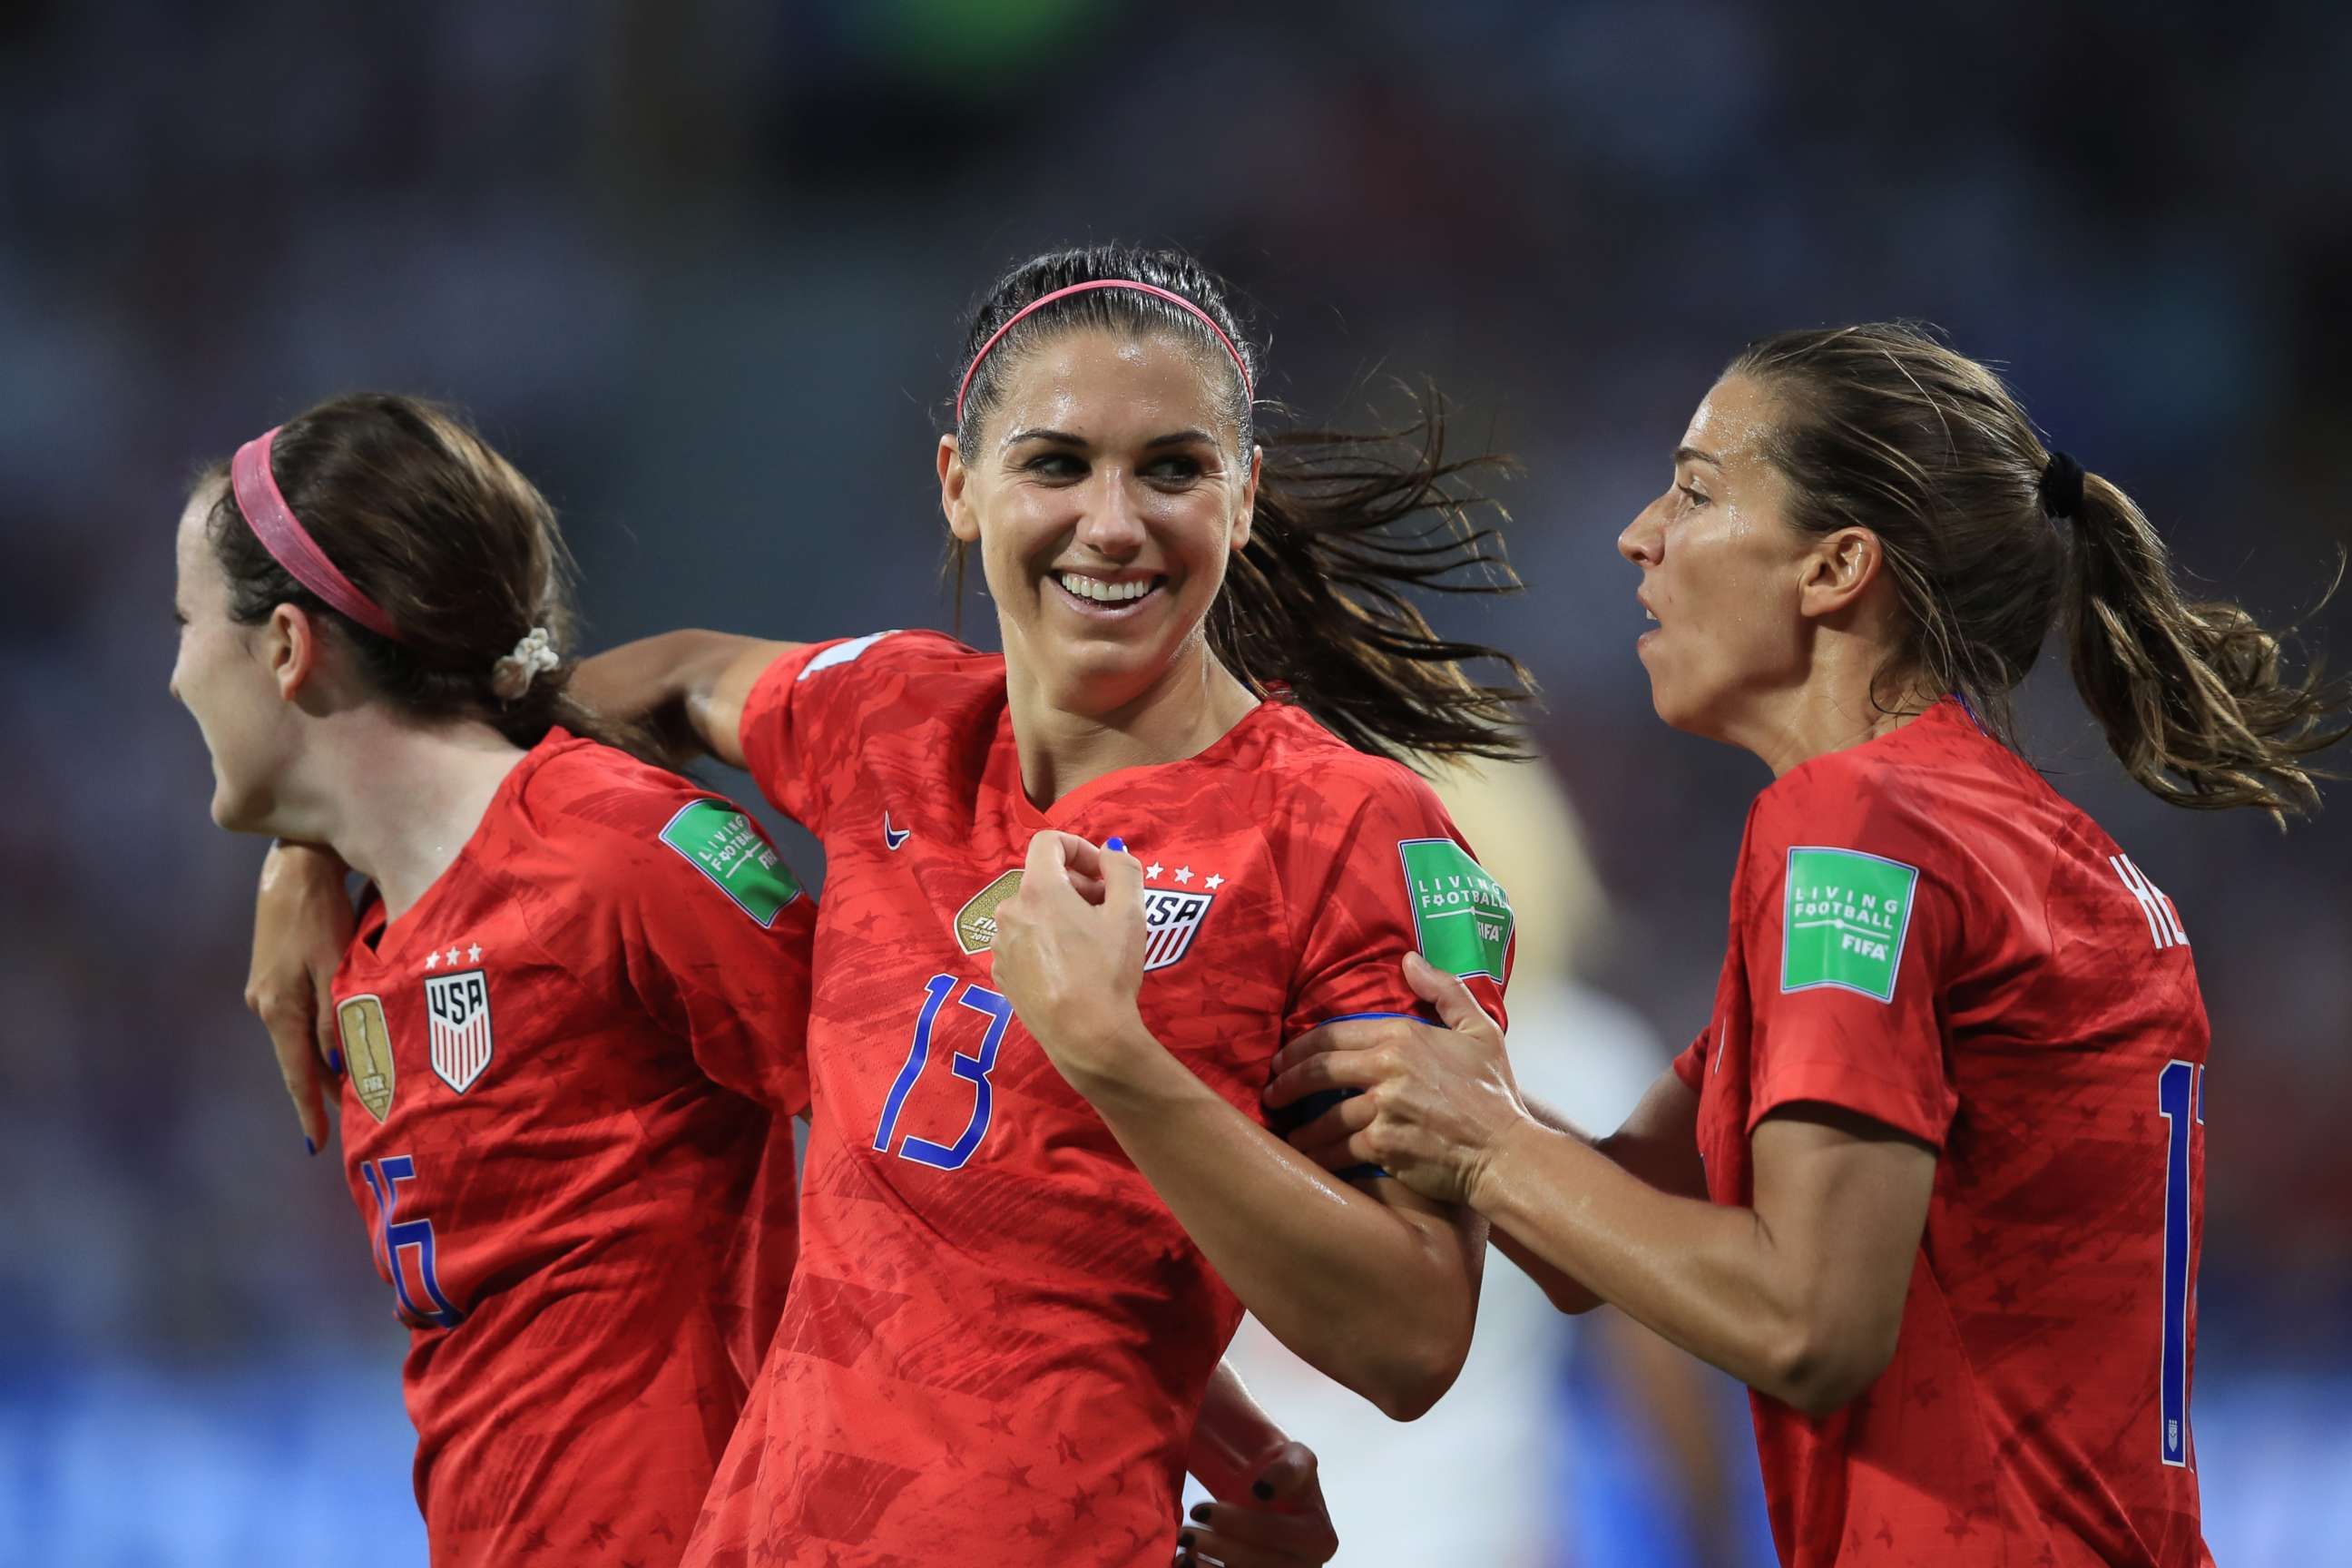 PHOTO: Alex Morgan of the United States celebrates scoring their 2nd goal during the 2019 FIFA Women's World Cup France Semi Final match between England and USA at Stade de Lyon on July 2, 2019, in Lyon, France.